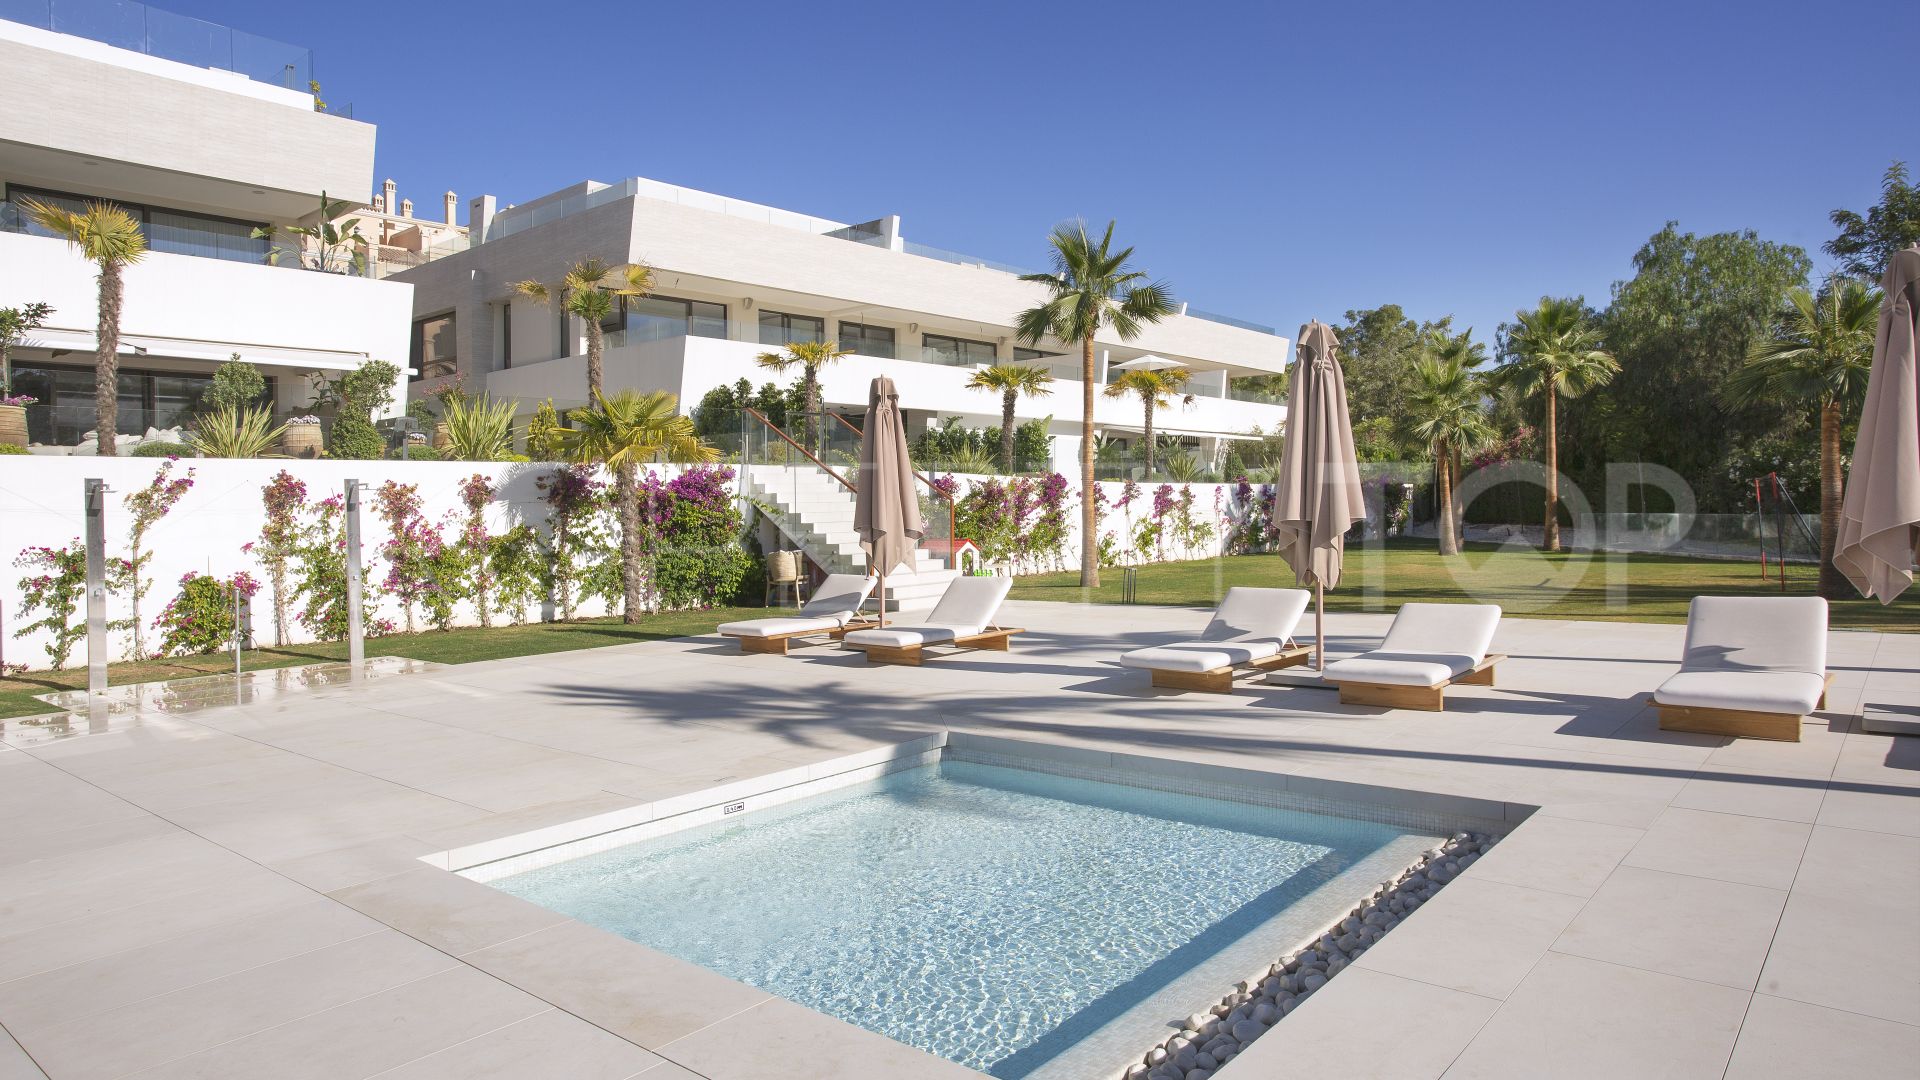 4 bedrooms duplex penthouse for sale in Epic Marbella